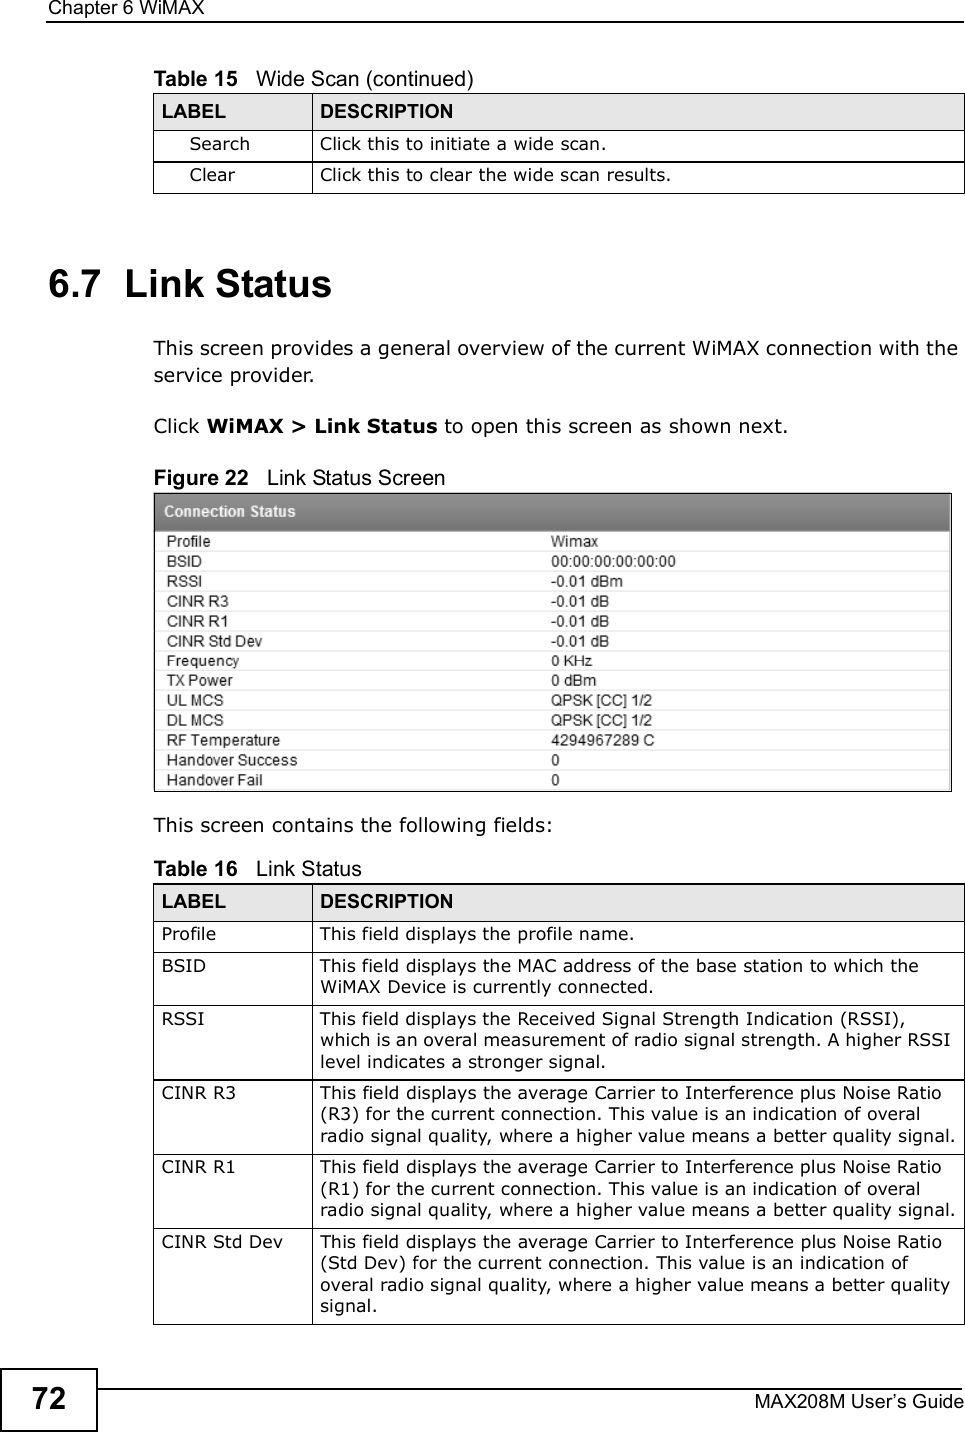 Chapter 6WiMAXMAX208M User s Guide726.7  Link StatusThis screen provides a general overview of the current WiMAX connection with the service provider.Click WiMAX &gt; Link Status to open this screen as shown next.Figure 22   Link Status ScreenThis screen contains the following fields:SearchClick this to initiate a wide scan.ClearClick this to clear the wide scan results.Table 15   Wide Scan (continued)LABEL DESCRIPTIONTable 16   Link StatusLABEL DESCRIPTIONProfileThis field displays the profile name.BSIDThis field displays the MAC address of the base station to which the WiMAX Device is currently connected.RSSIThis field displays the Received Signal Strength Indication (RSSI), which is an overal measurement of radio signal strength. A higher RSSI level indicates a stronger signal.CINR R3This field displays the average Carrier to Interference plus Noise Ratio (R3) for the current connection. This value is an indication of overal radio signal quality, where a higher value means a better quality signal.CINR R1This field displays the average Carrier to Interference plus Noise Ratio (R1) for the current connection. This value is an indication of overal radio signal quality, where a higher value means a better quality signal.CINR Std DevThis field displays the average Carrier to Interference plus Noise Ratio (Std Dev) for the current connection. This value is an indication of overal radio signal quality, where a higher value means a better quality signal.